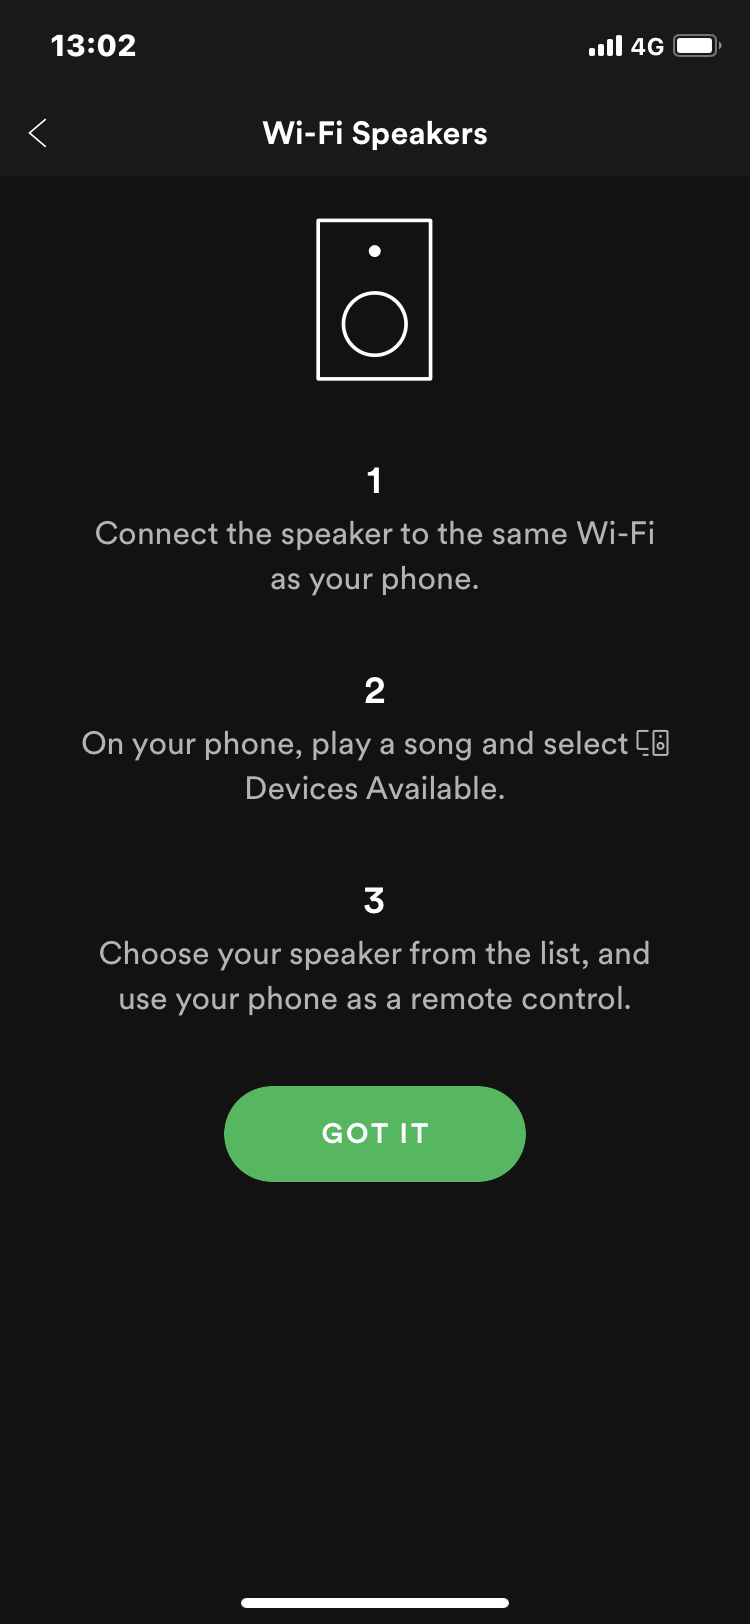 sonos not showing up in spotify connect Sonos Community